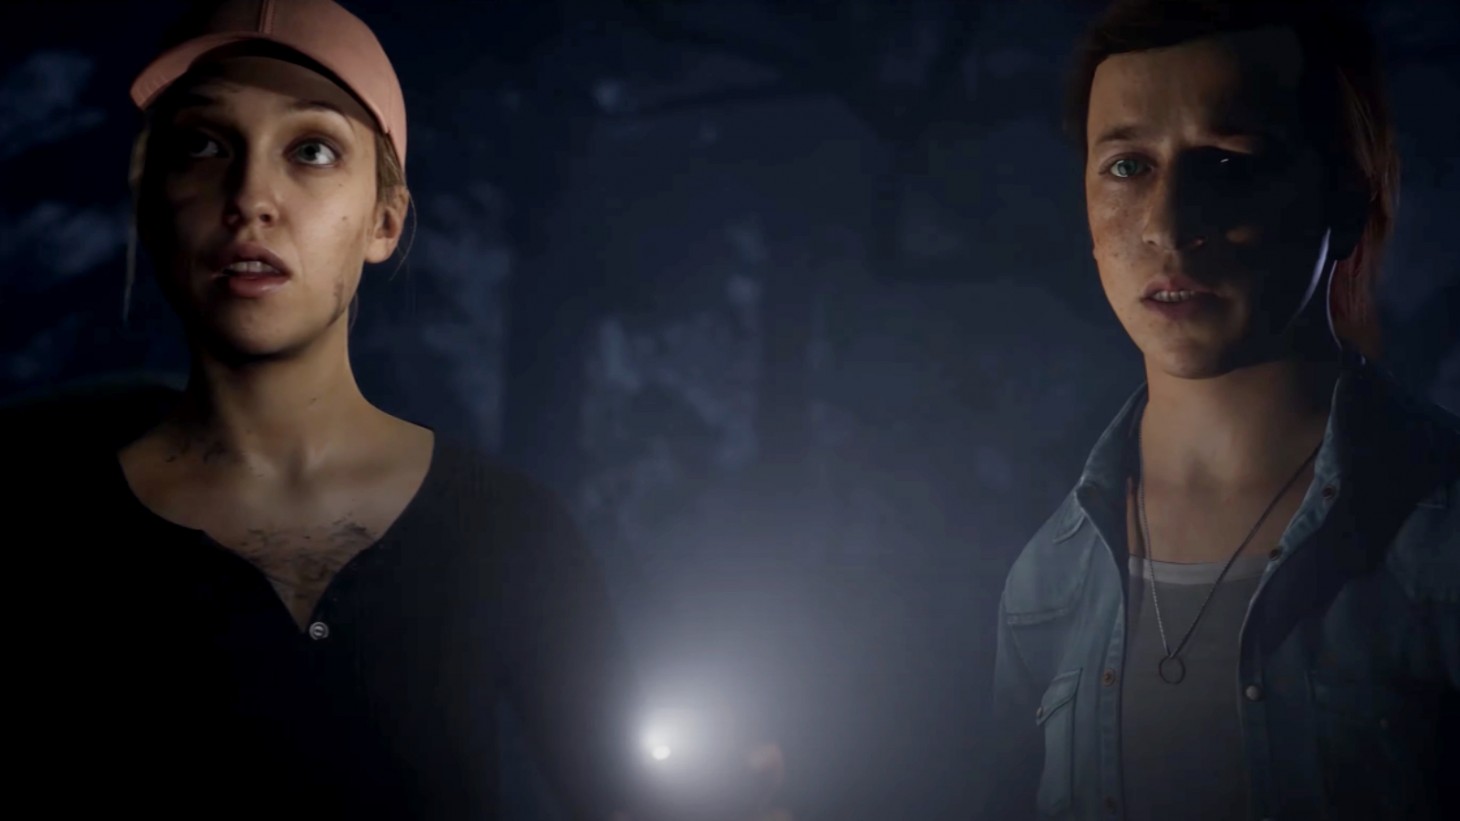 Supermassive Games Releases First 30 Minutes Of Gameplay From The